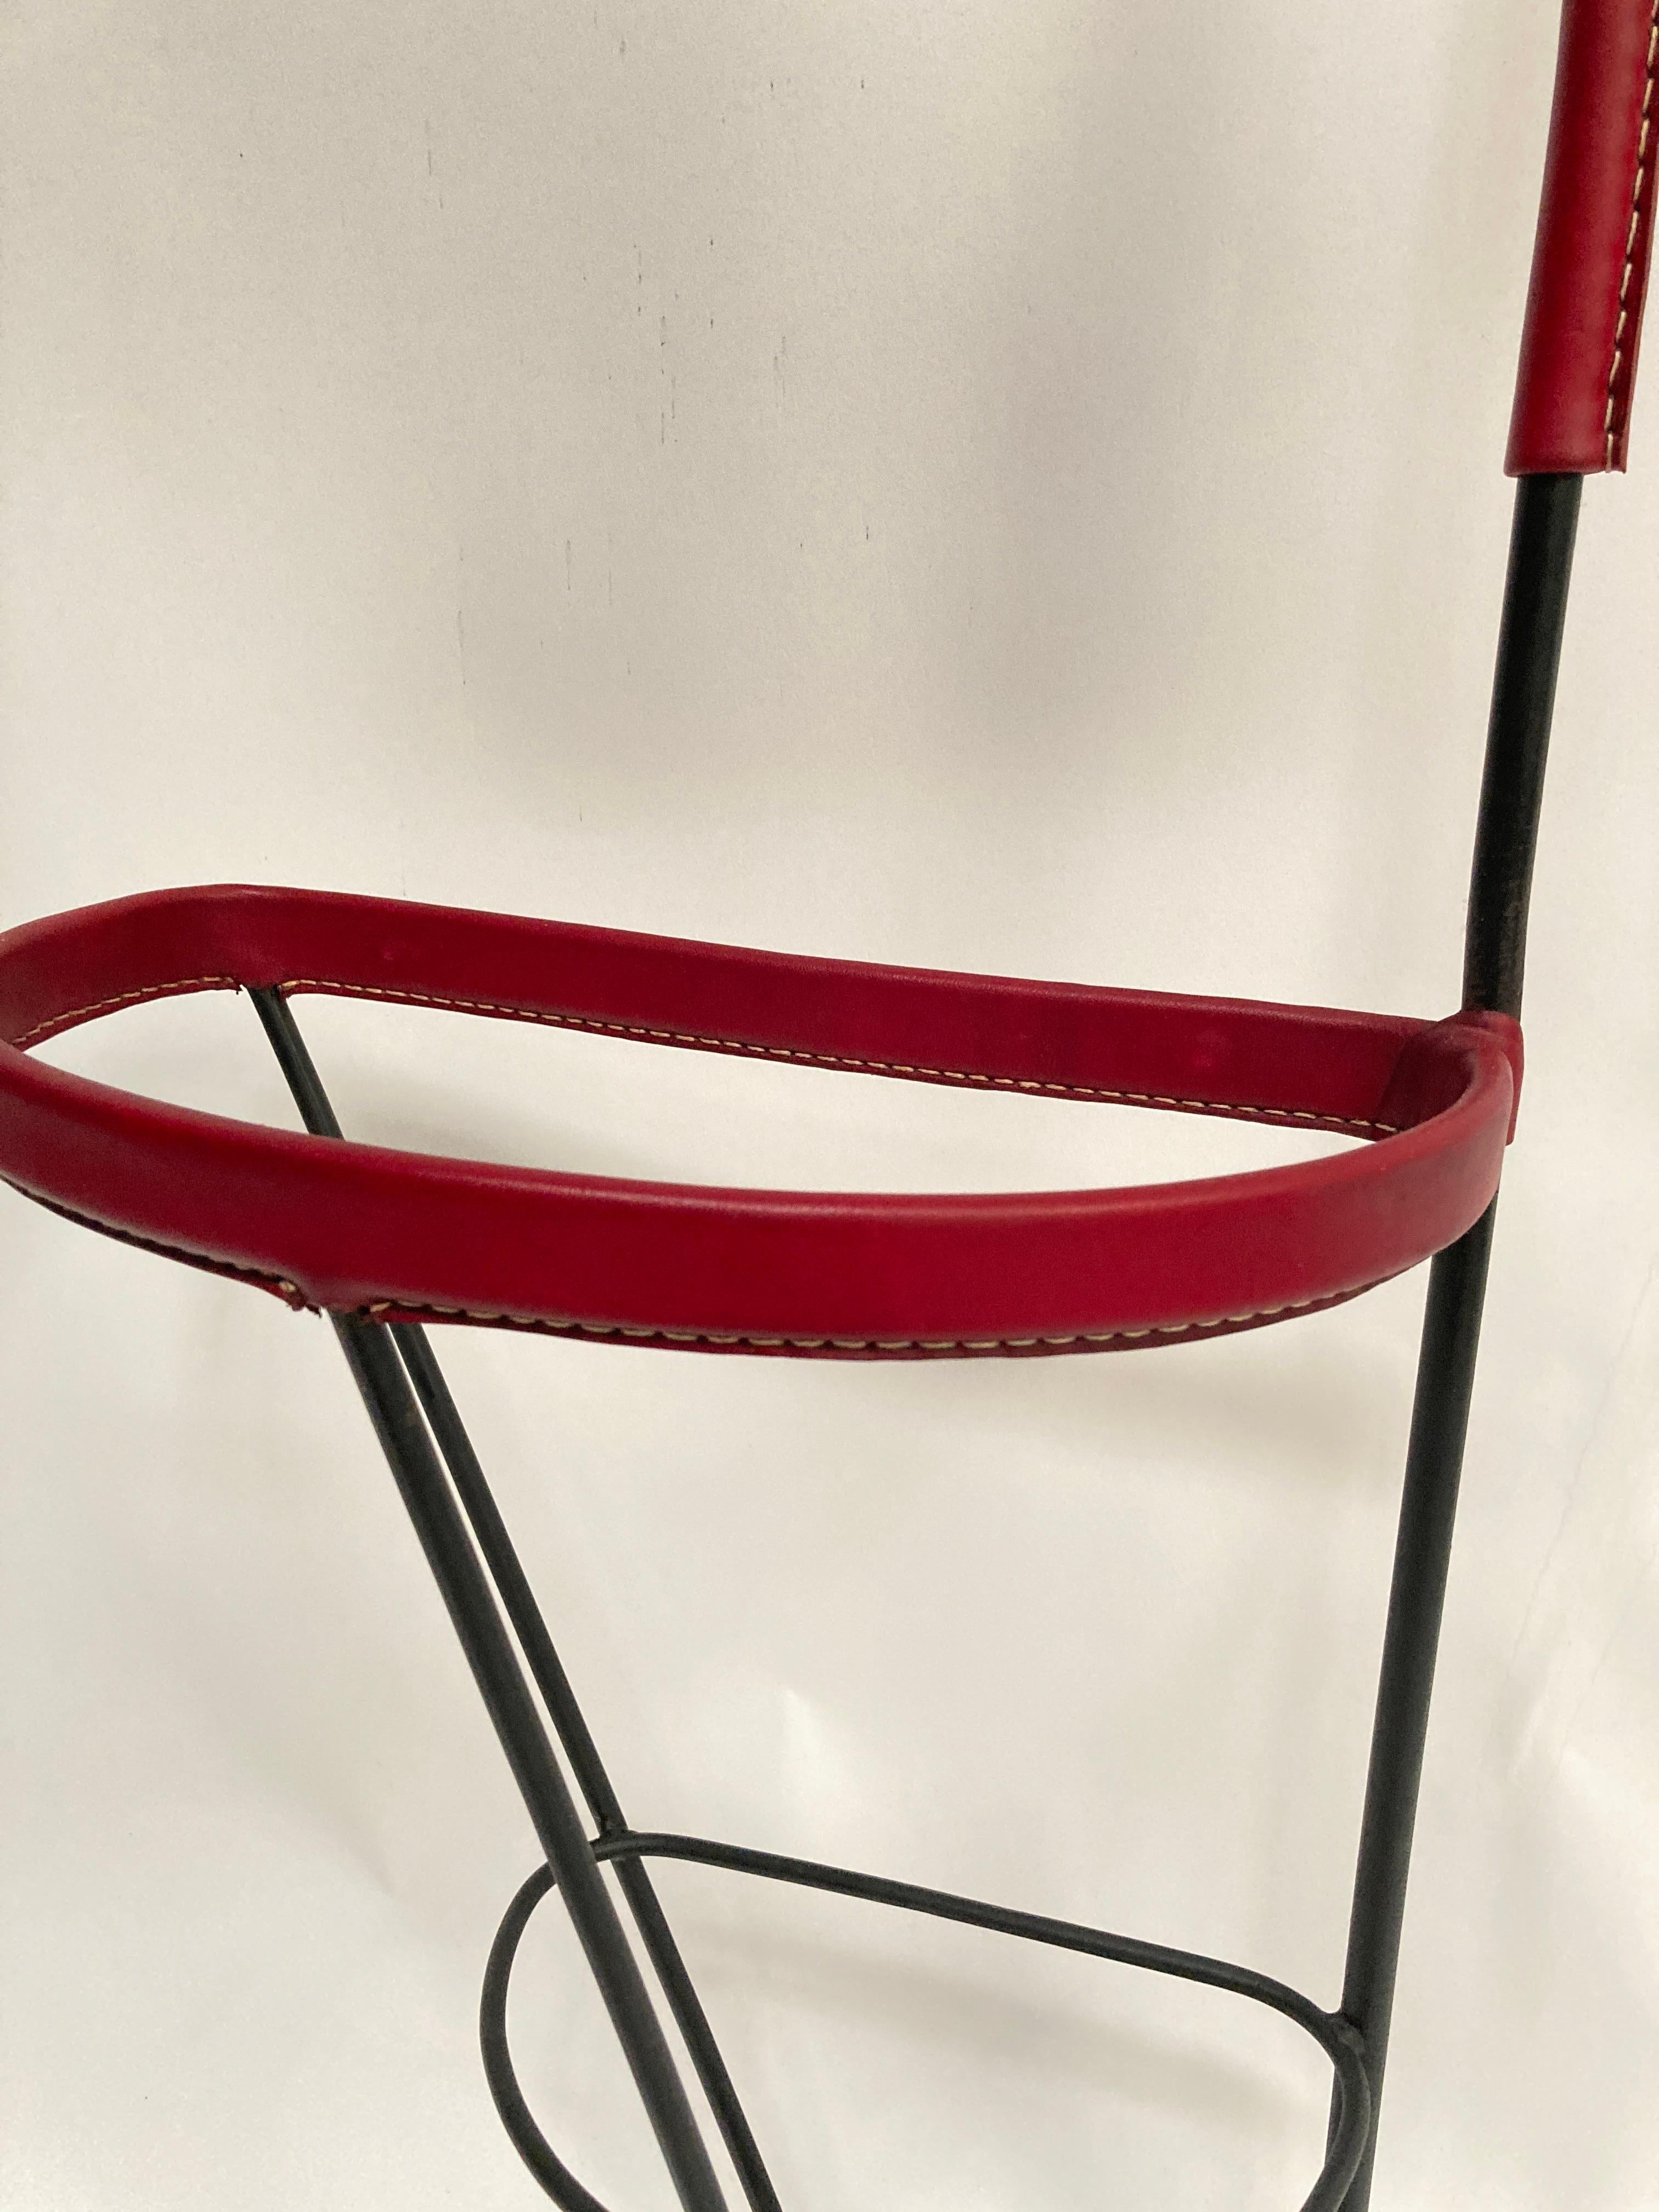 Mid-20th Century 1950's Stitched leather coat rack by Jacques Adnet For Sale